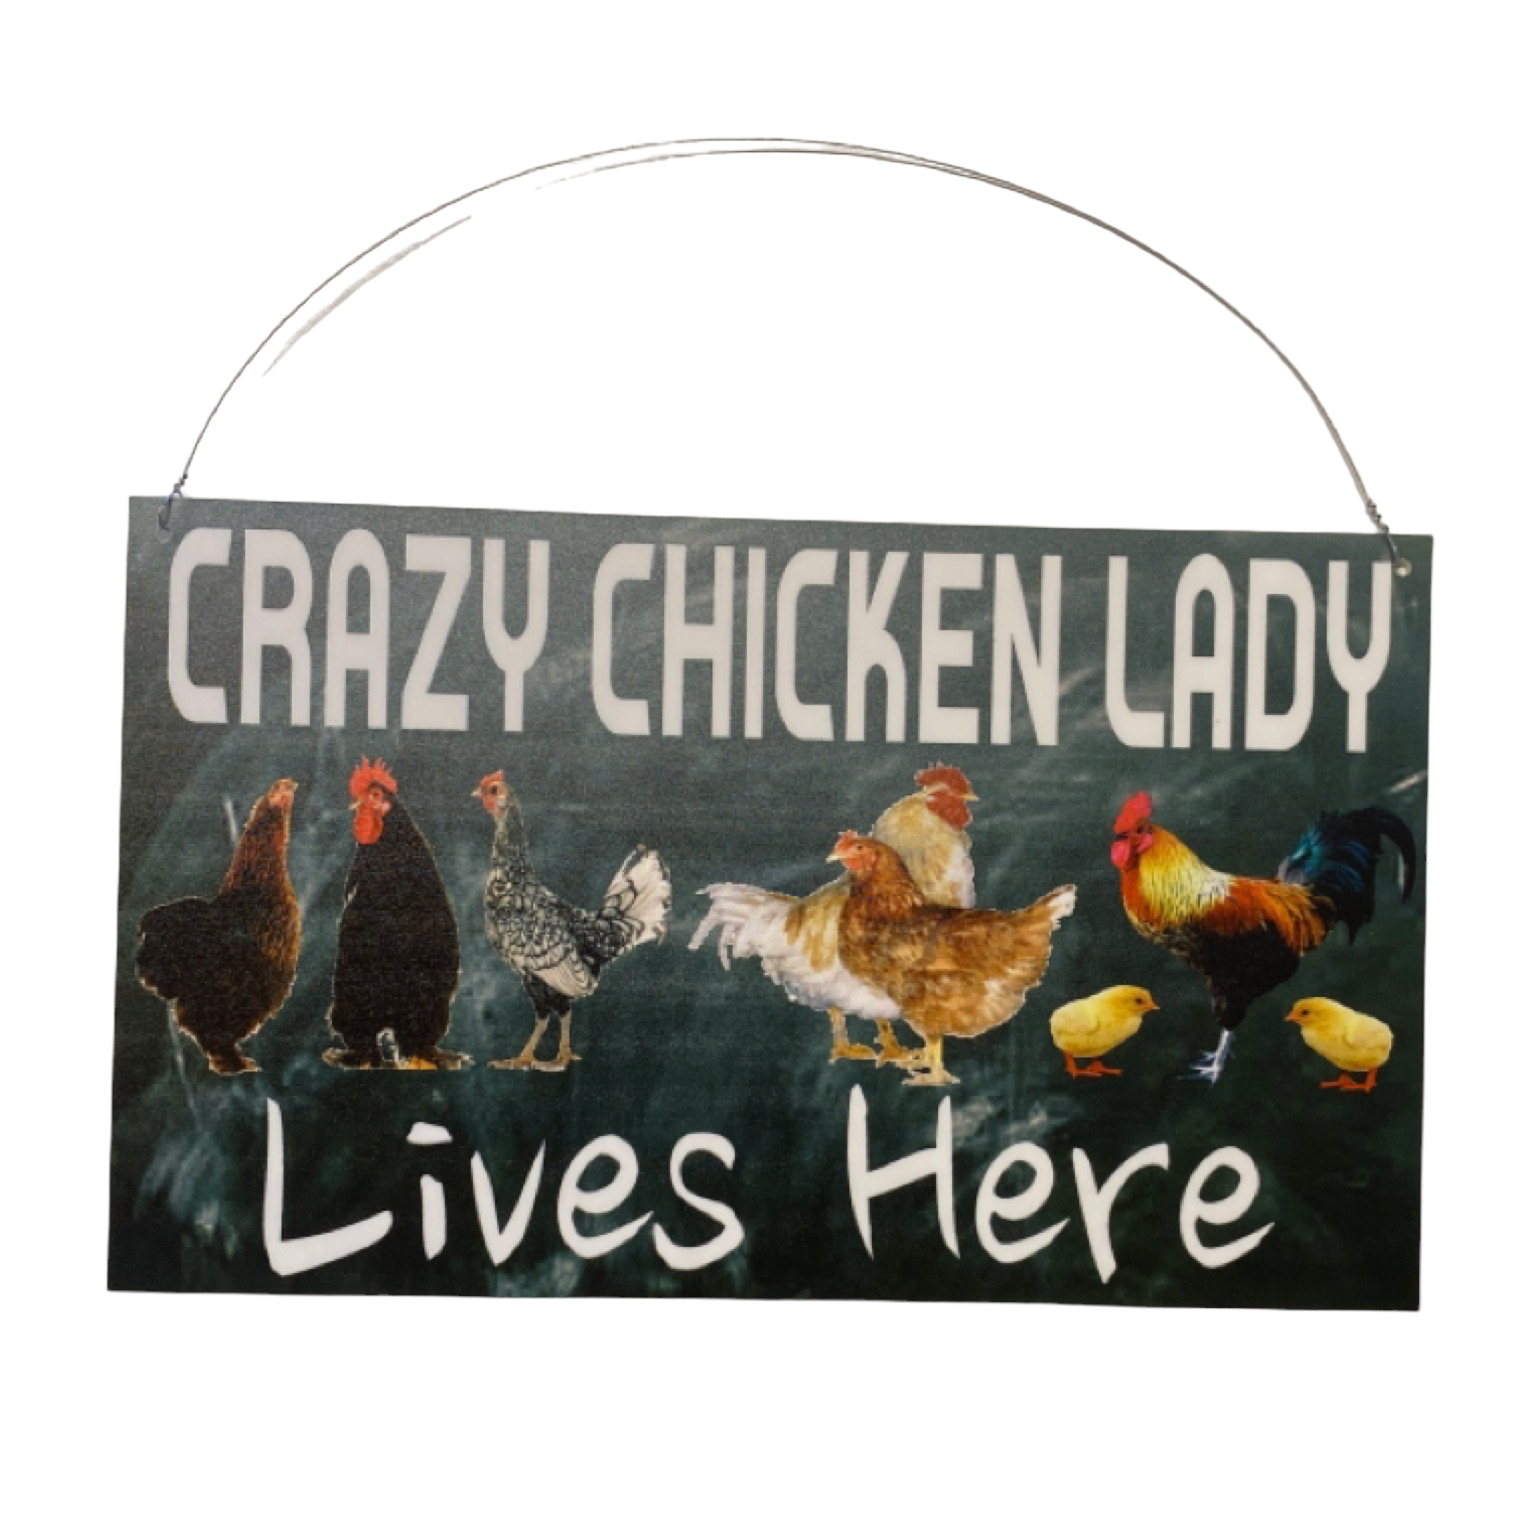 Crazy Chicken Lady Lives Here Sign - The Renmy Store Homewares & Gifts 